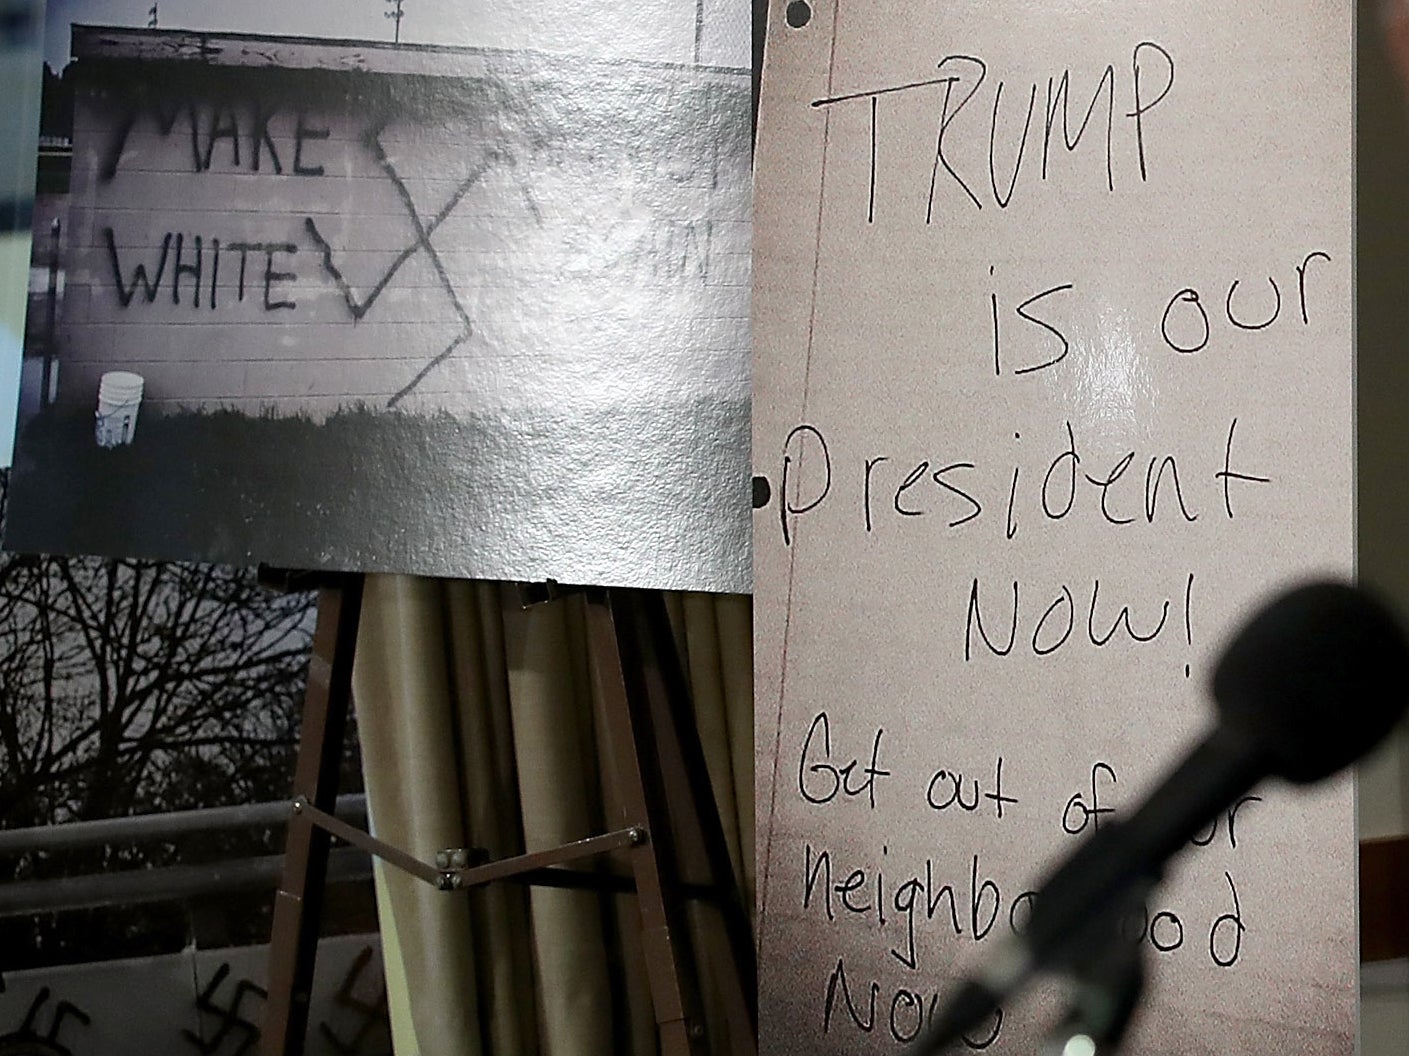 Southern Poverty Law Centre presented images of racist graffiti after Trump election